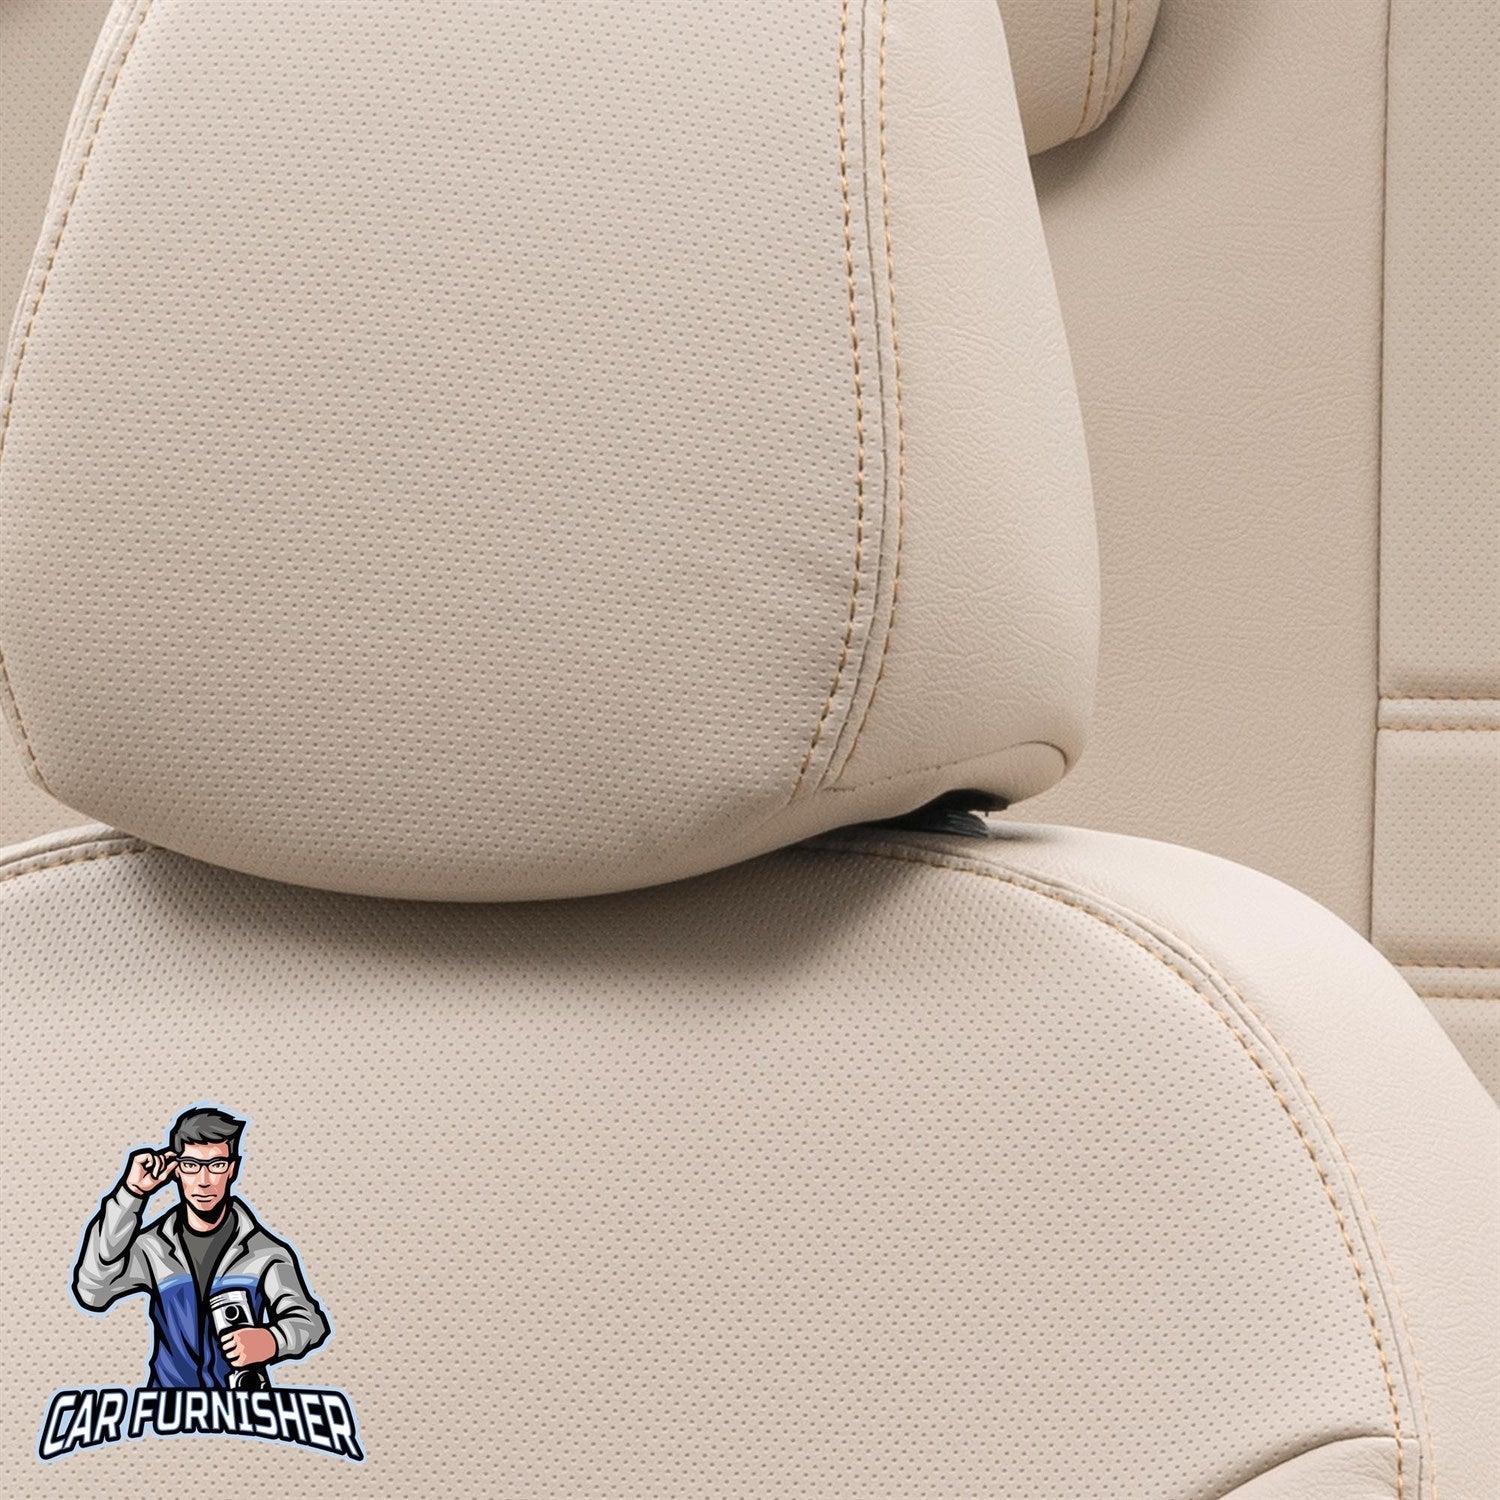 Volkswagen Sharan Seat Cover Istanbul Leather Design Beige Leather